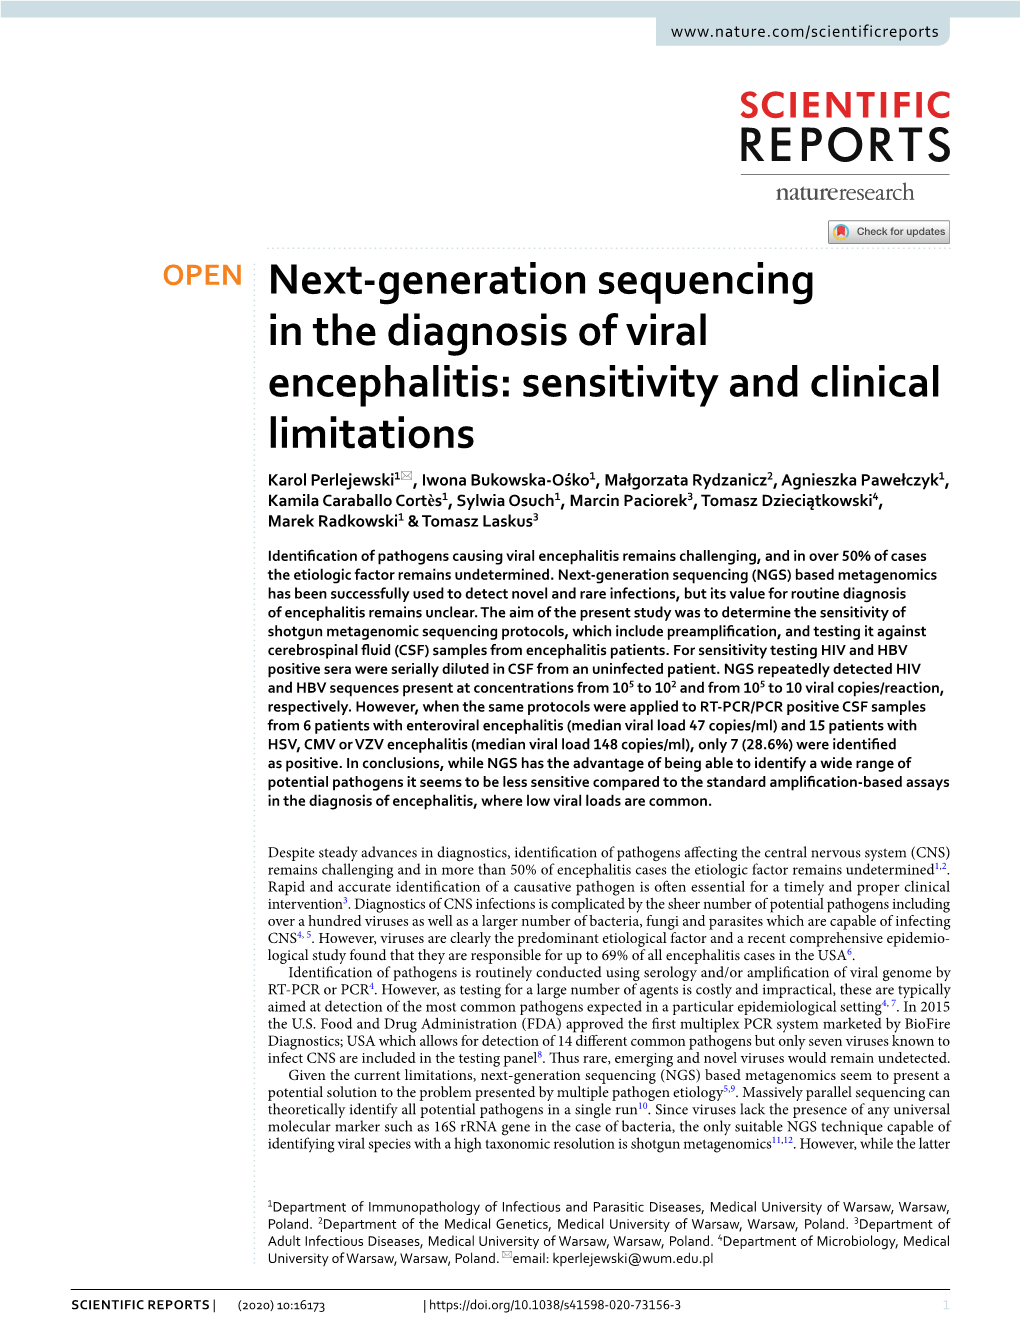 Next-Generation Sequencing in the Diagnosis of Viral